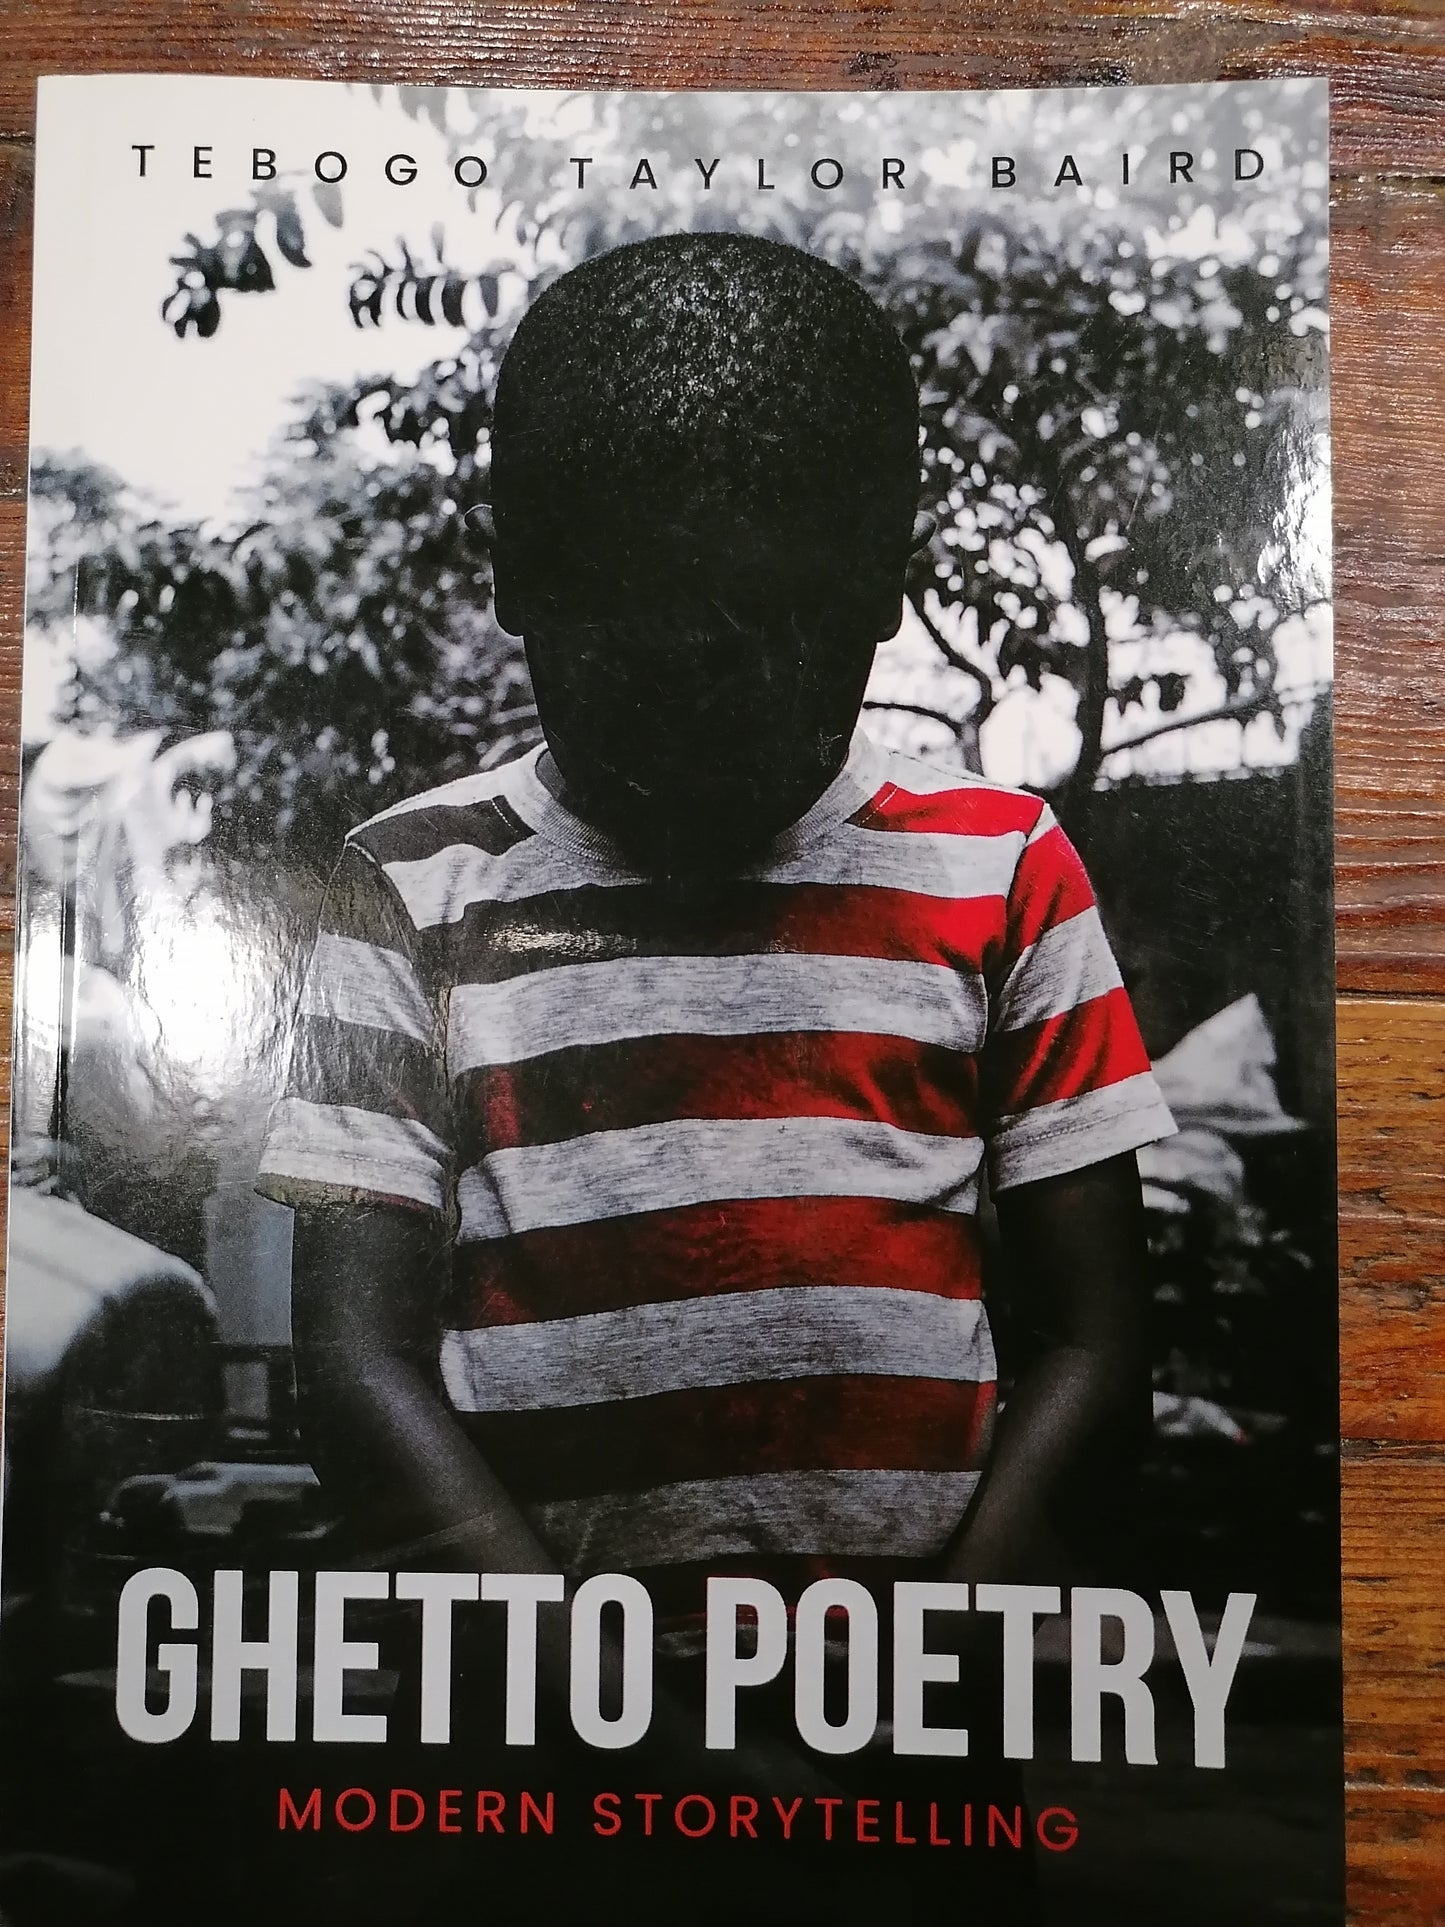 Ghetto Poetry by Tebogo Taylor Baird